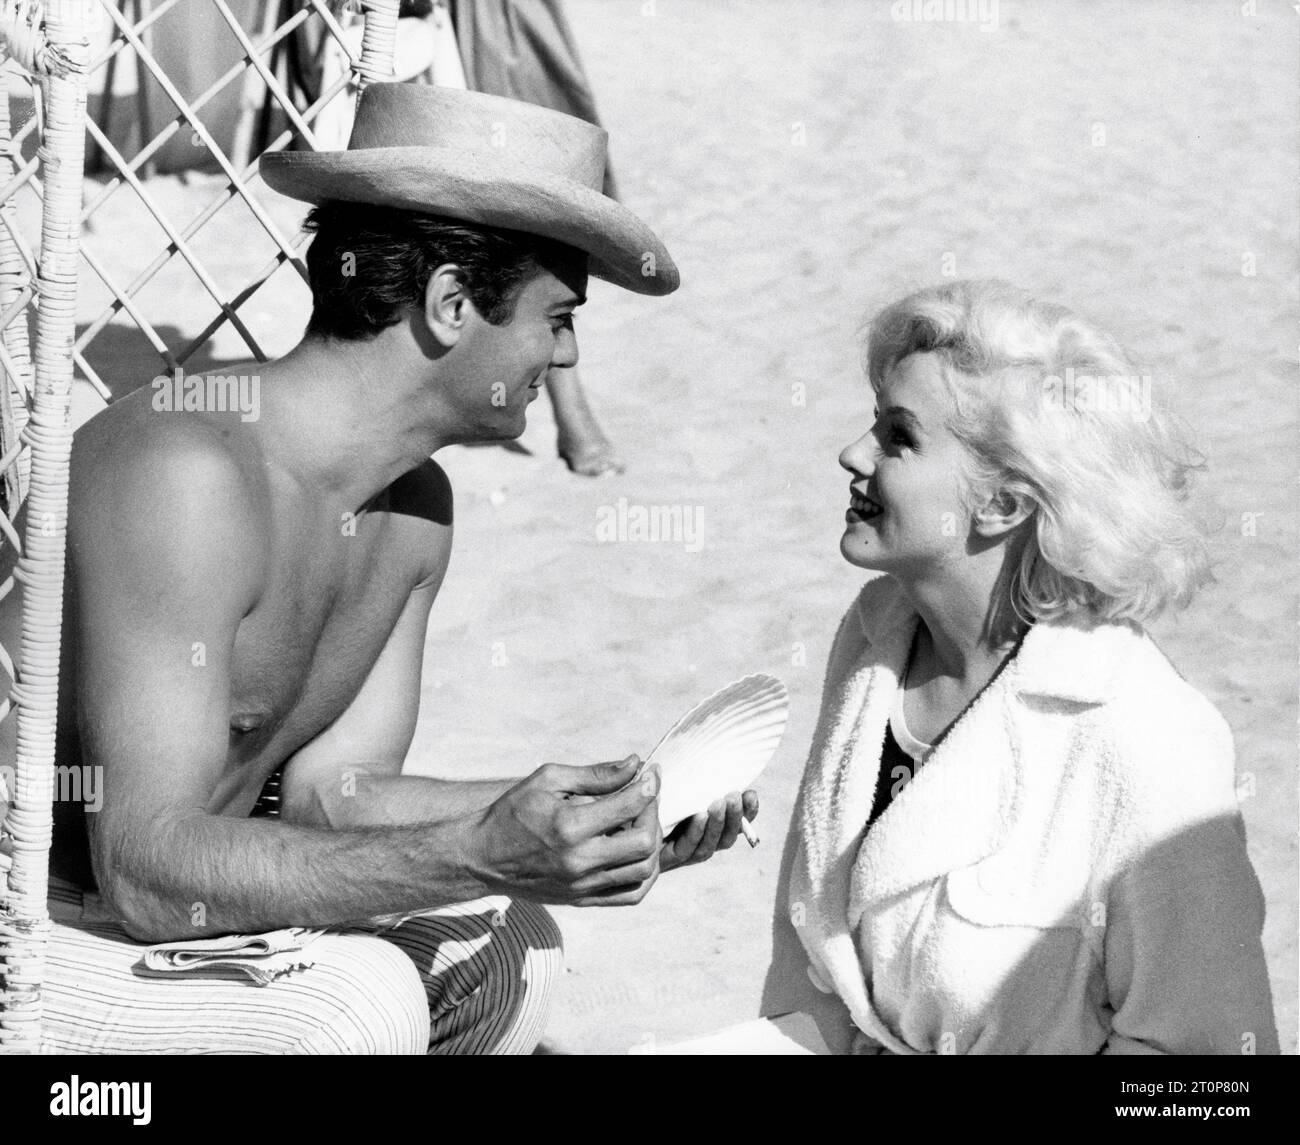 TONY CURTIS and MARILYN MONROE on set location rehearsal candid on Coronado Beach, California during filming of SOME LIKE IT HOT 1959 director BILLY WILDER screenplay Billy Wilder and I.A.L. Diamond Ashton Productions / The Mirisch Corporation / United Artists Stock Photo